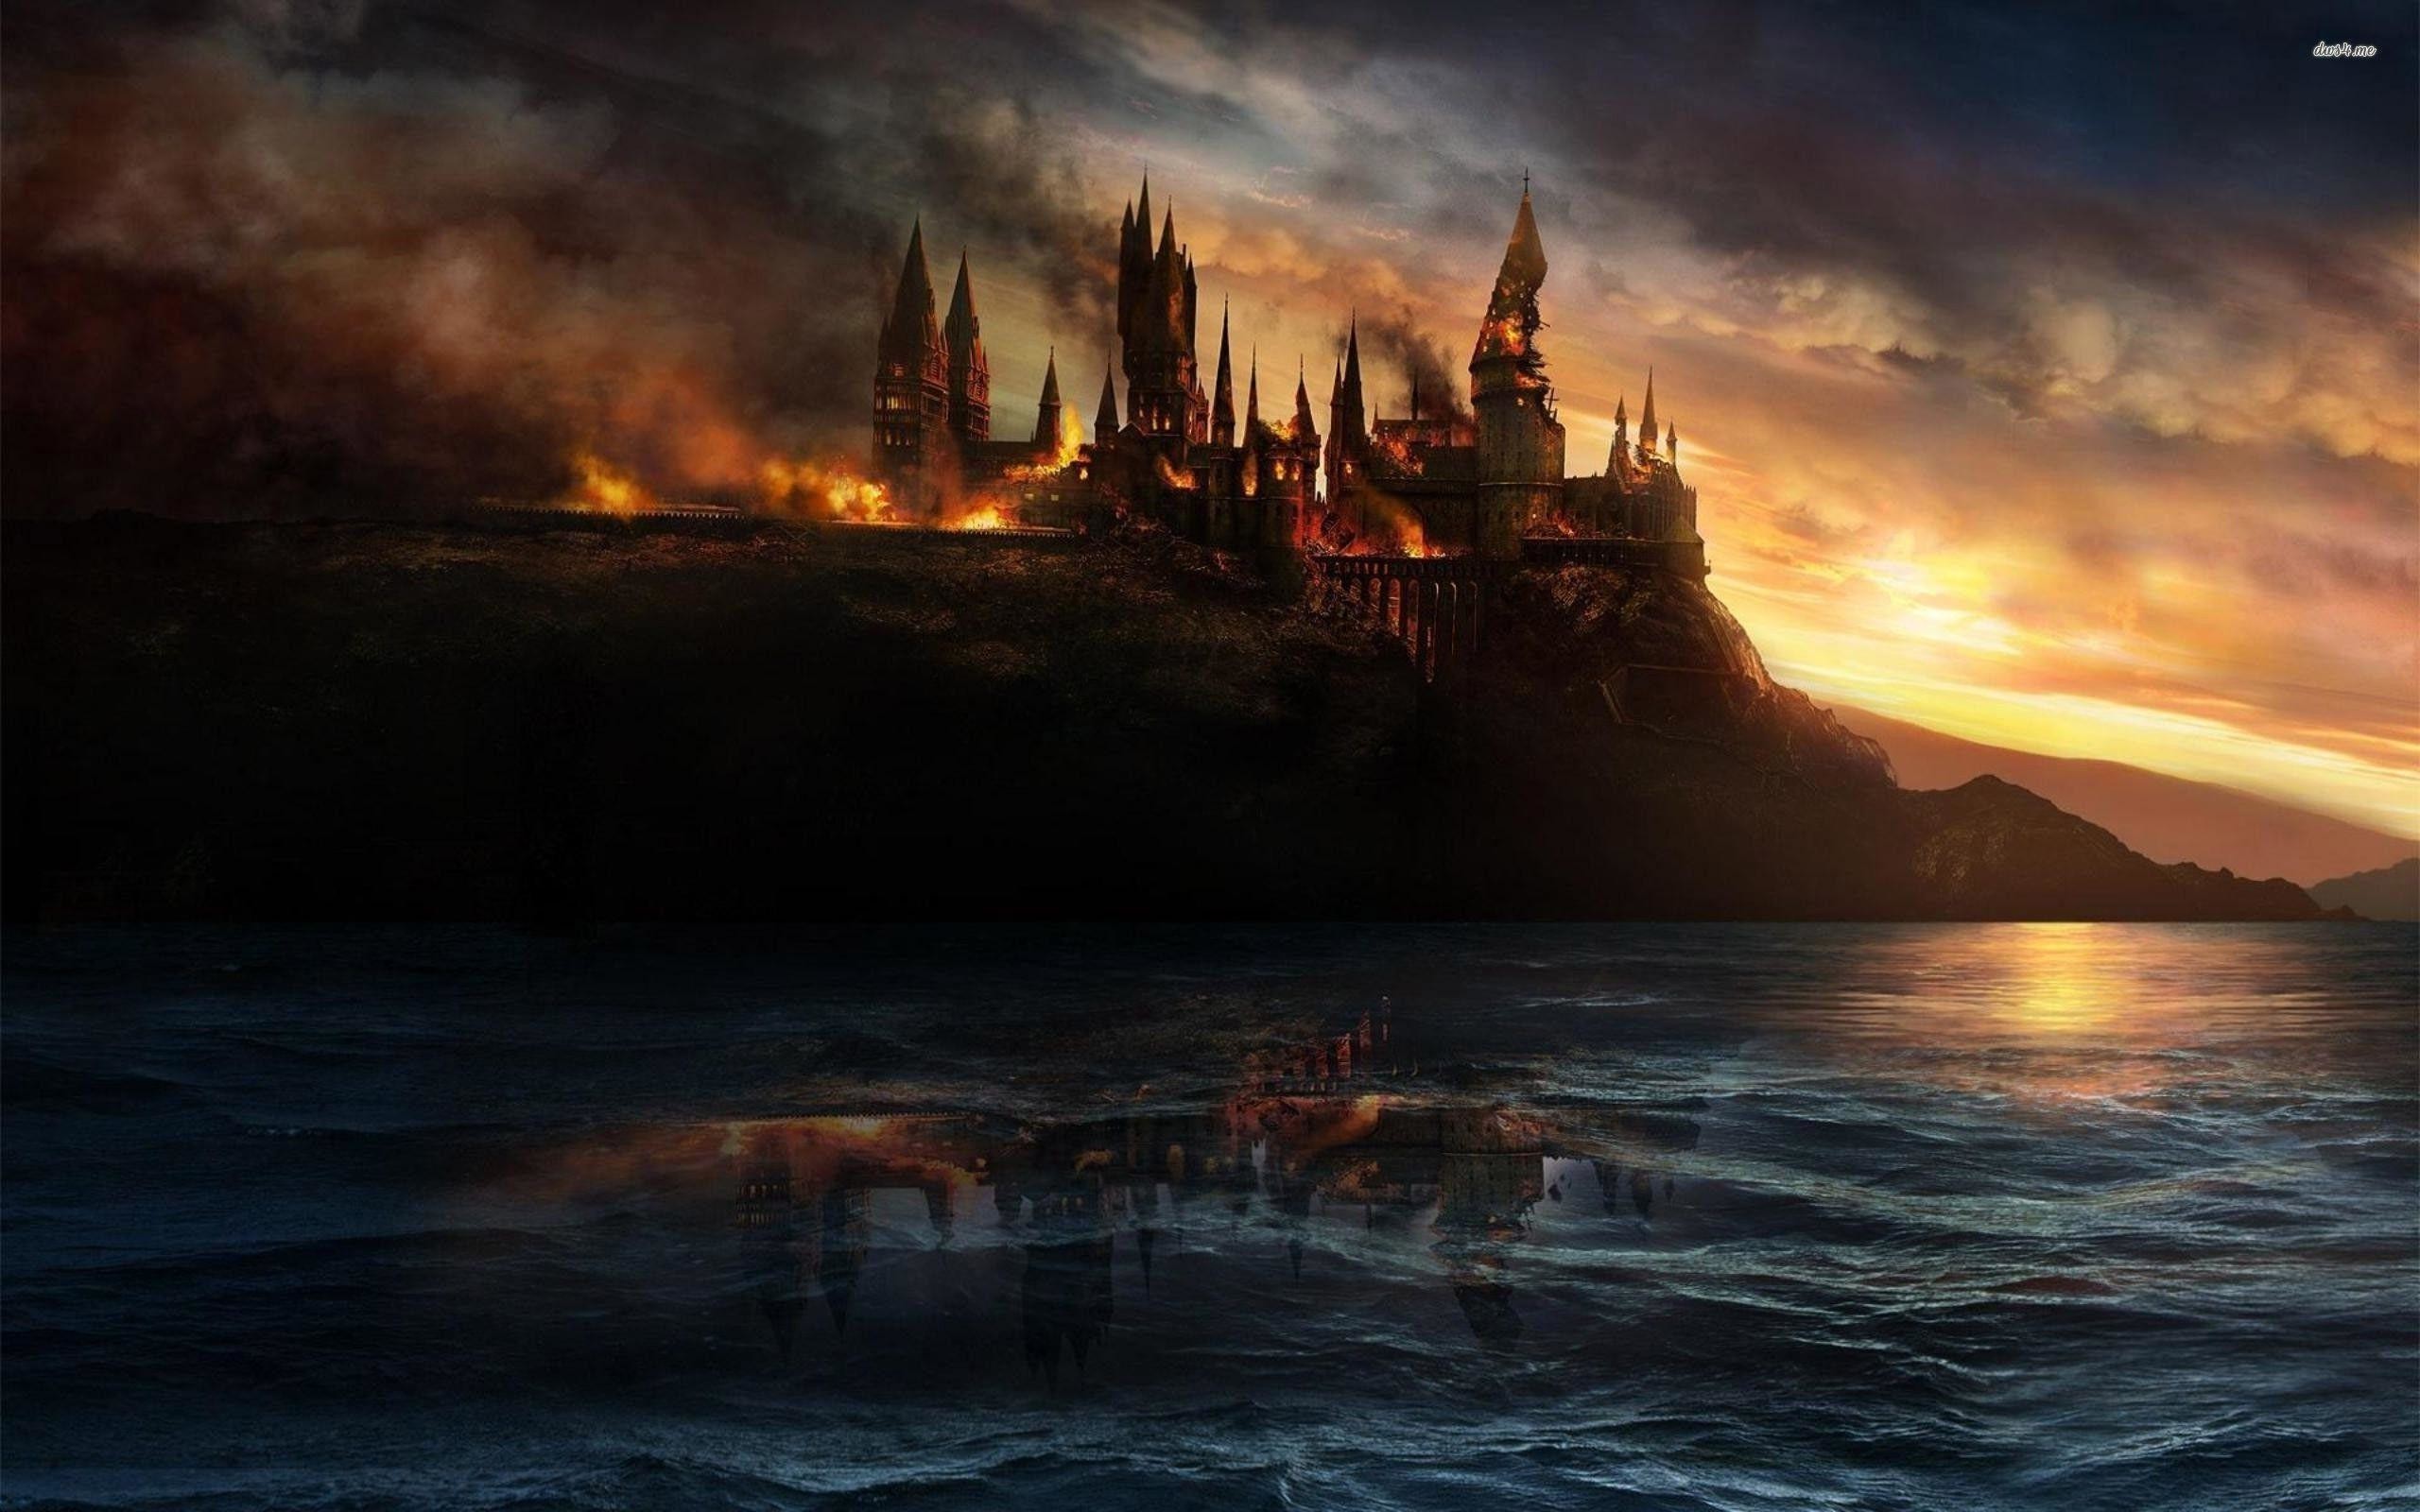 Harry Potter Deathly Hallows Wallpapers – Full HD wallpaper search